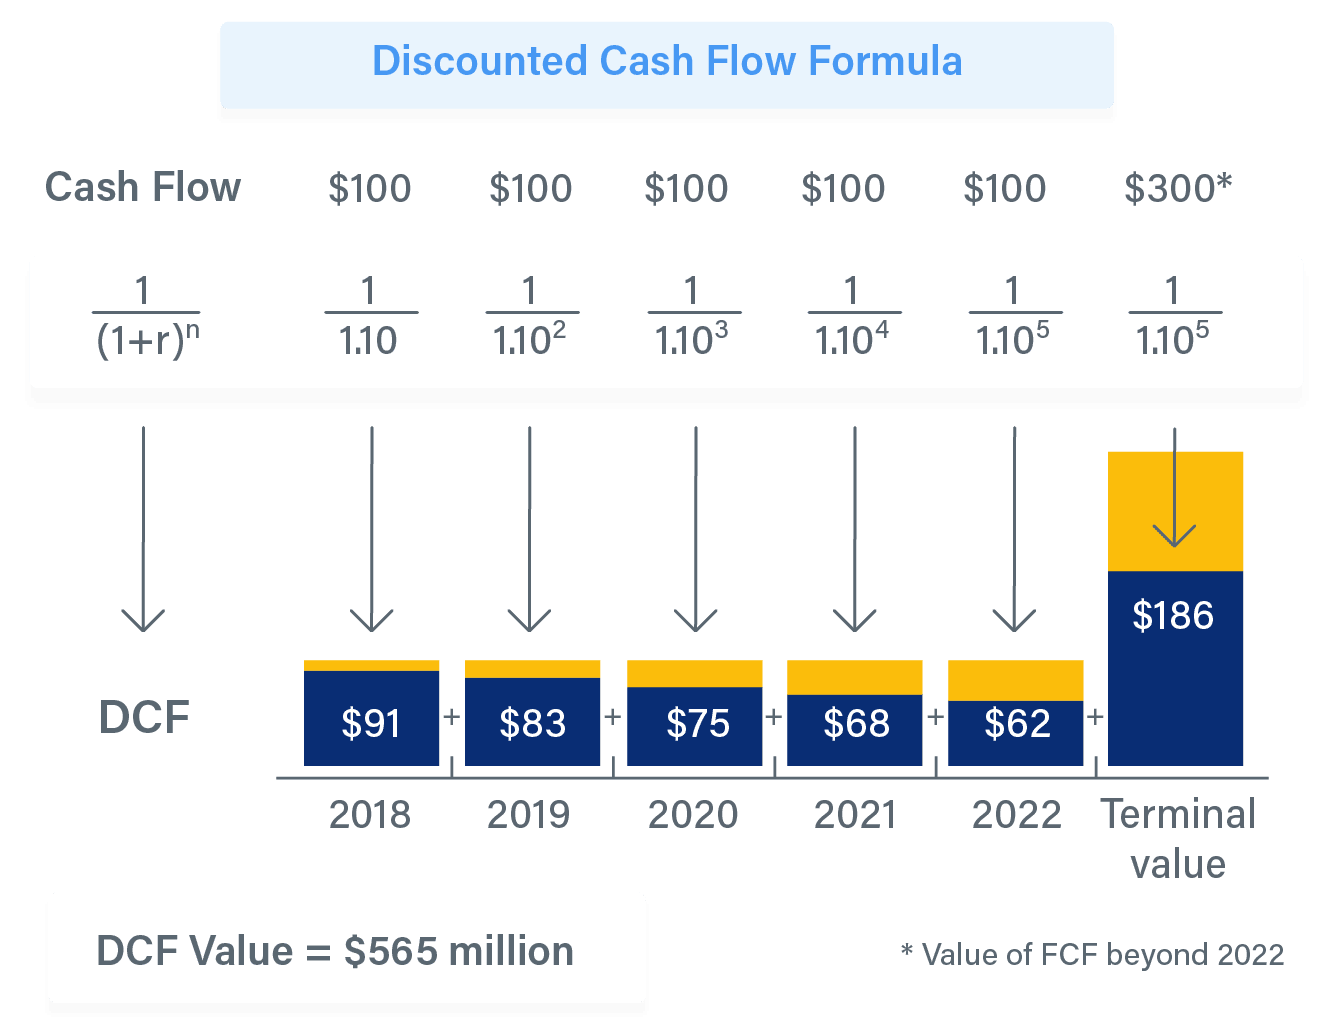 The discounted Cash Flow Model